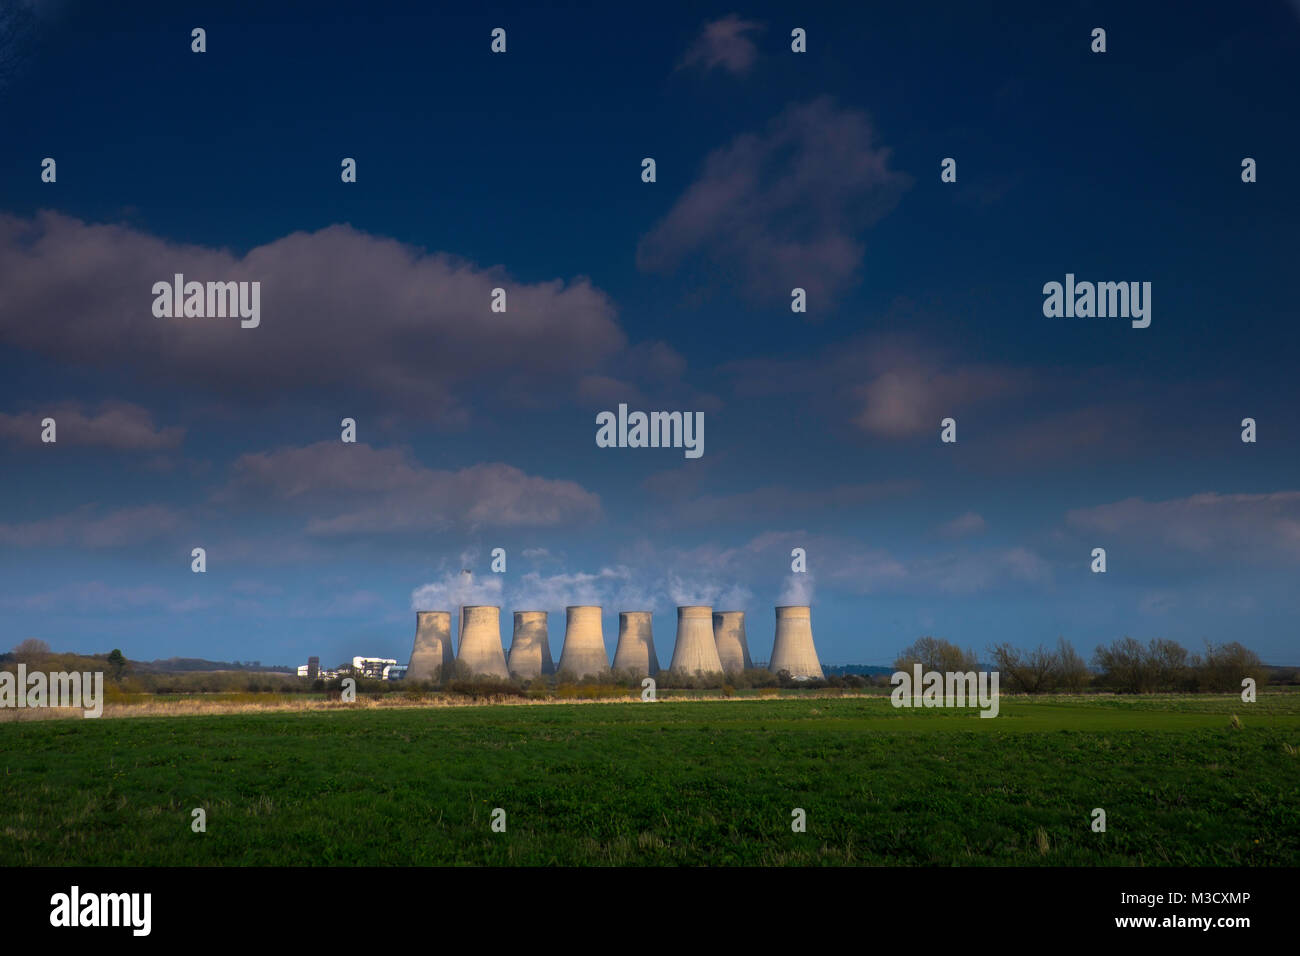 Ratcliffe-on-Soar coal-fired power station operated by E.ON UK. Stock Photo